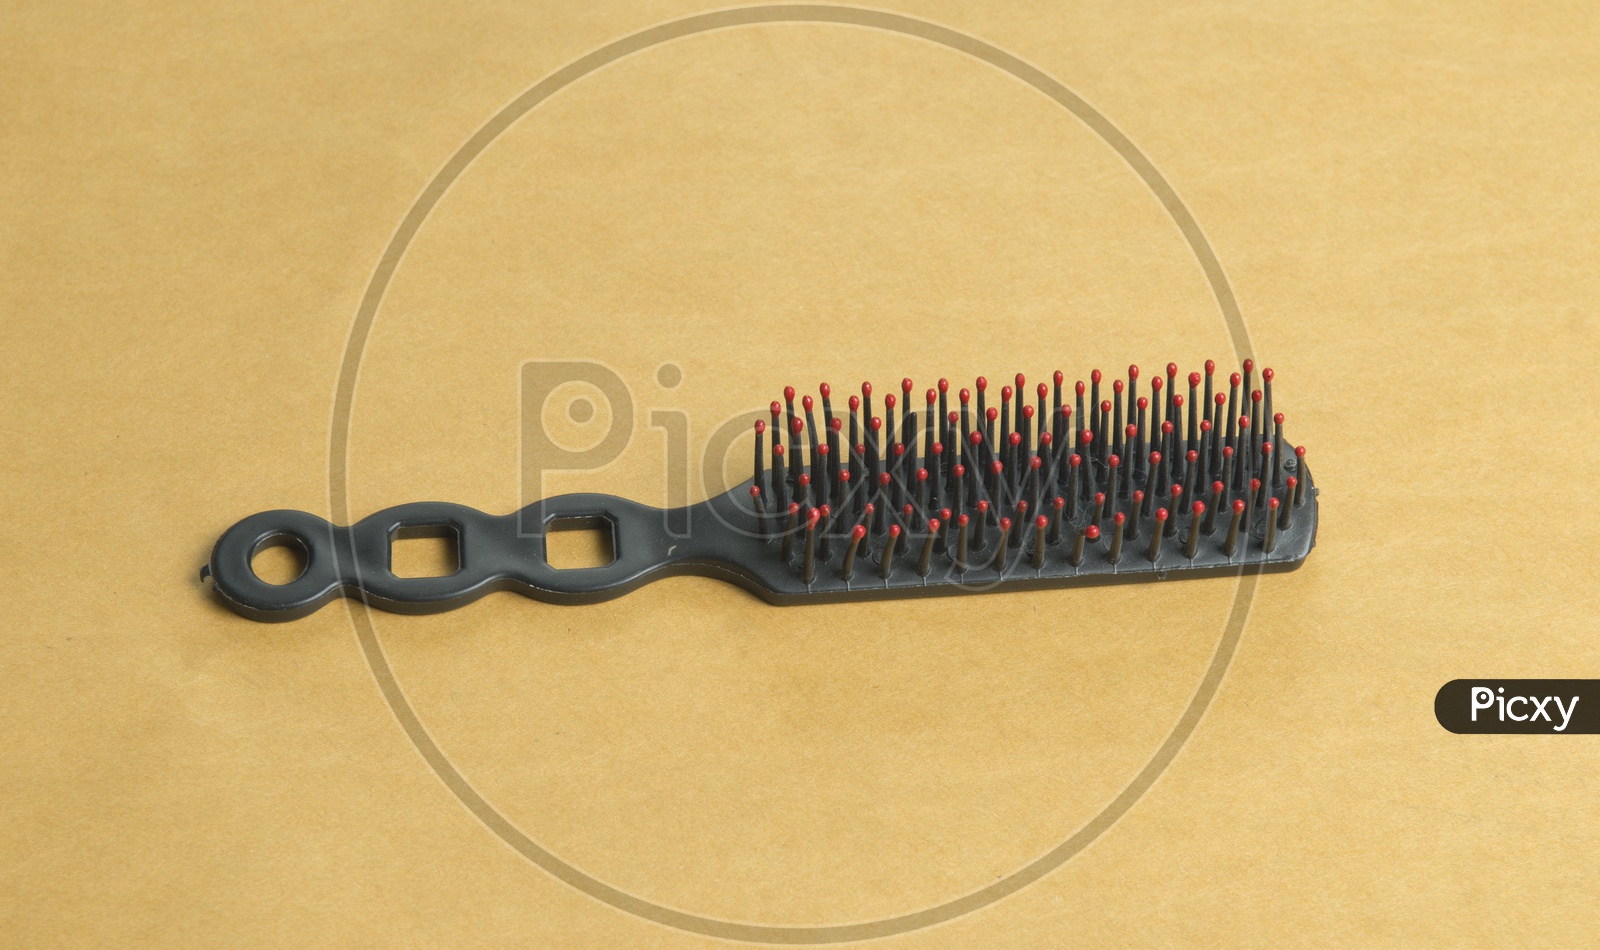 A Black comb on the table